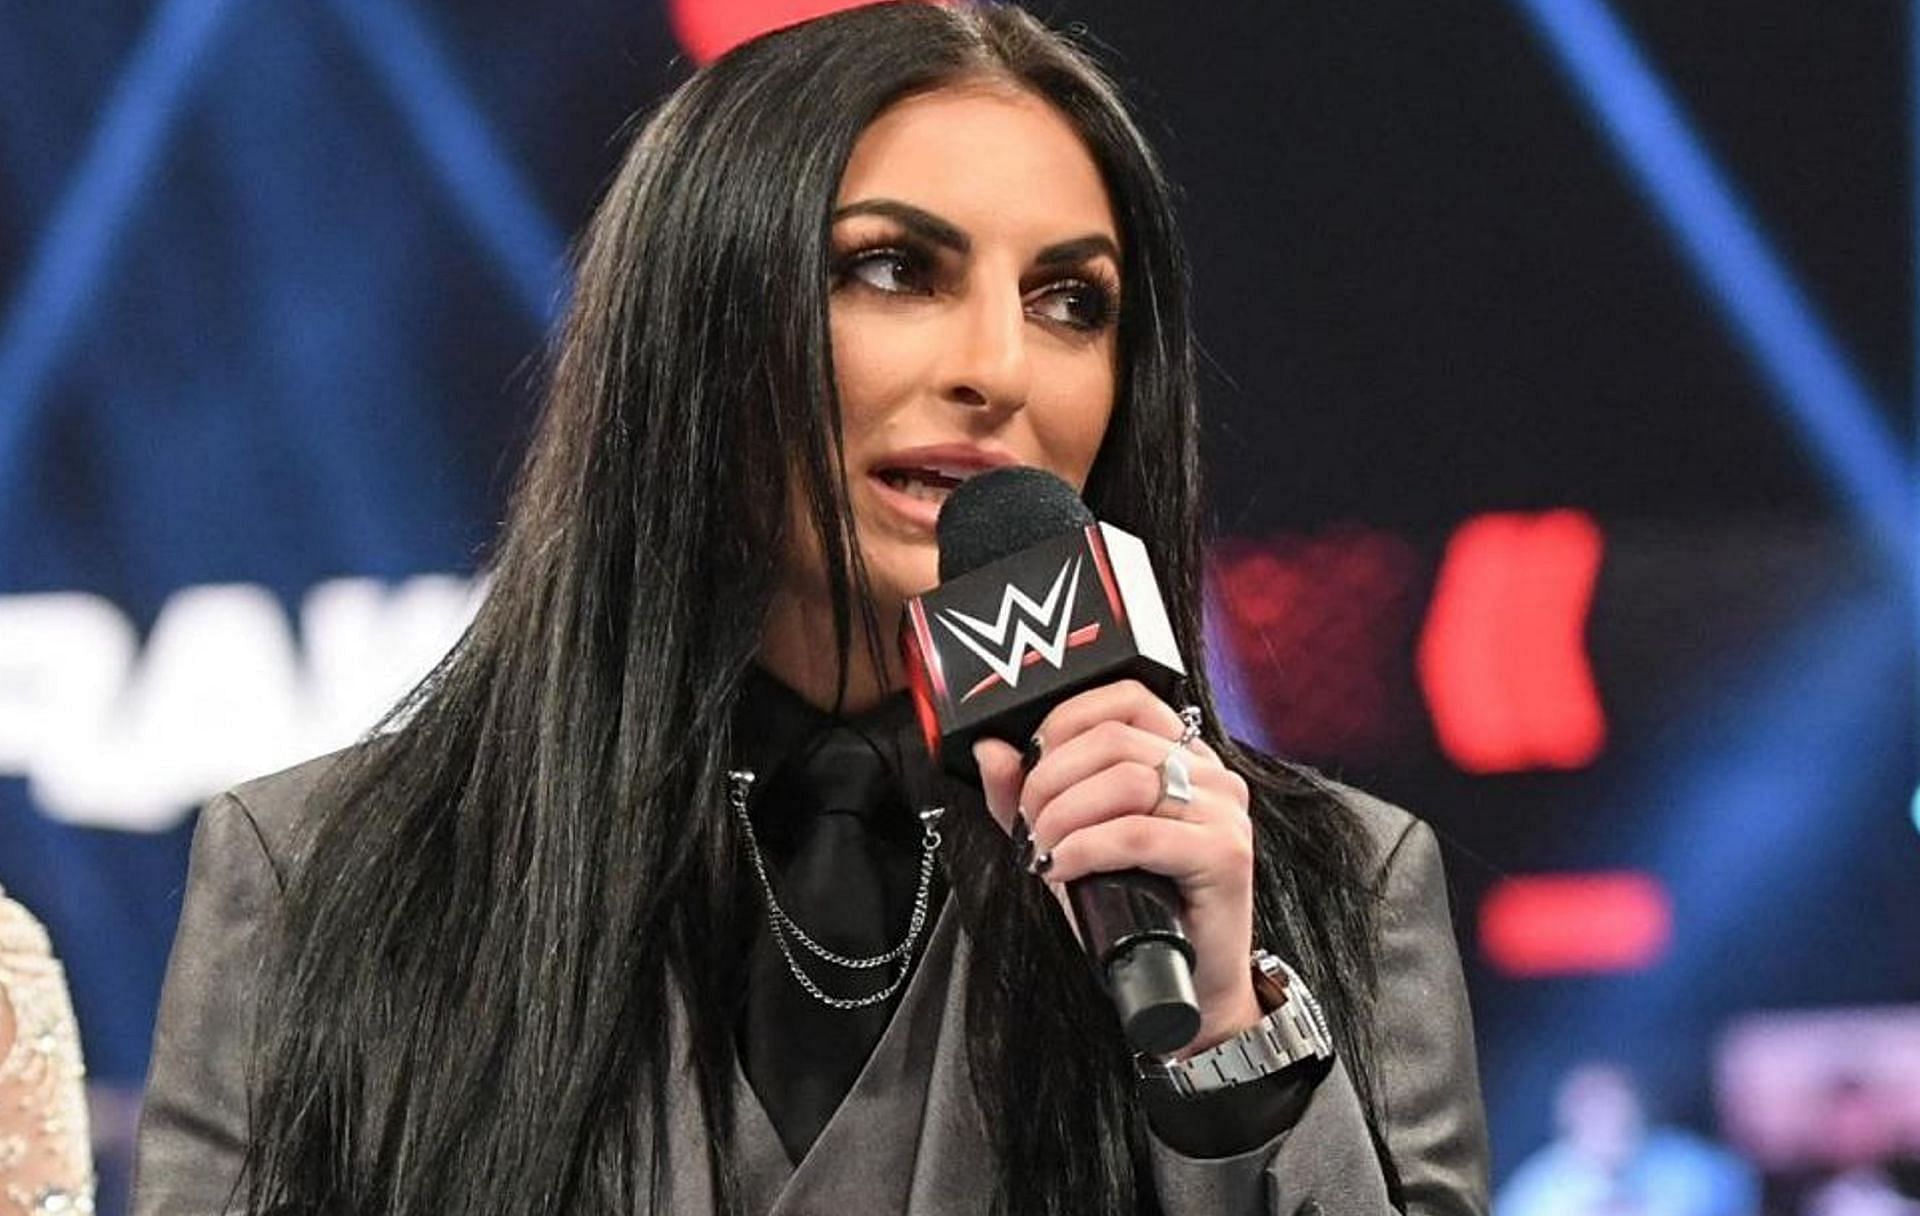 Sonya Deville recently broke the &quot;forbidden door&quot; with Anthony Bowens.